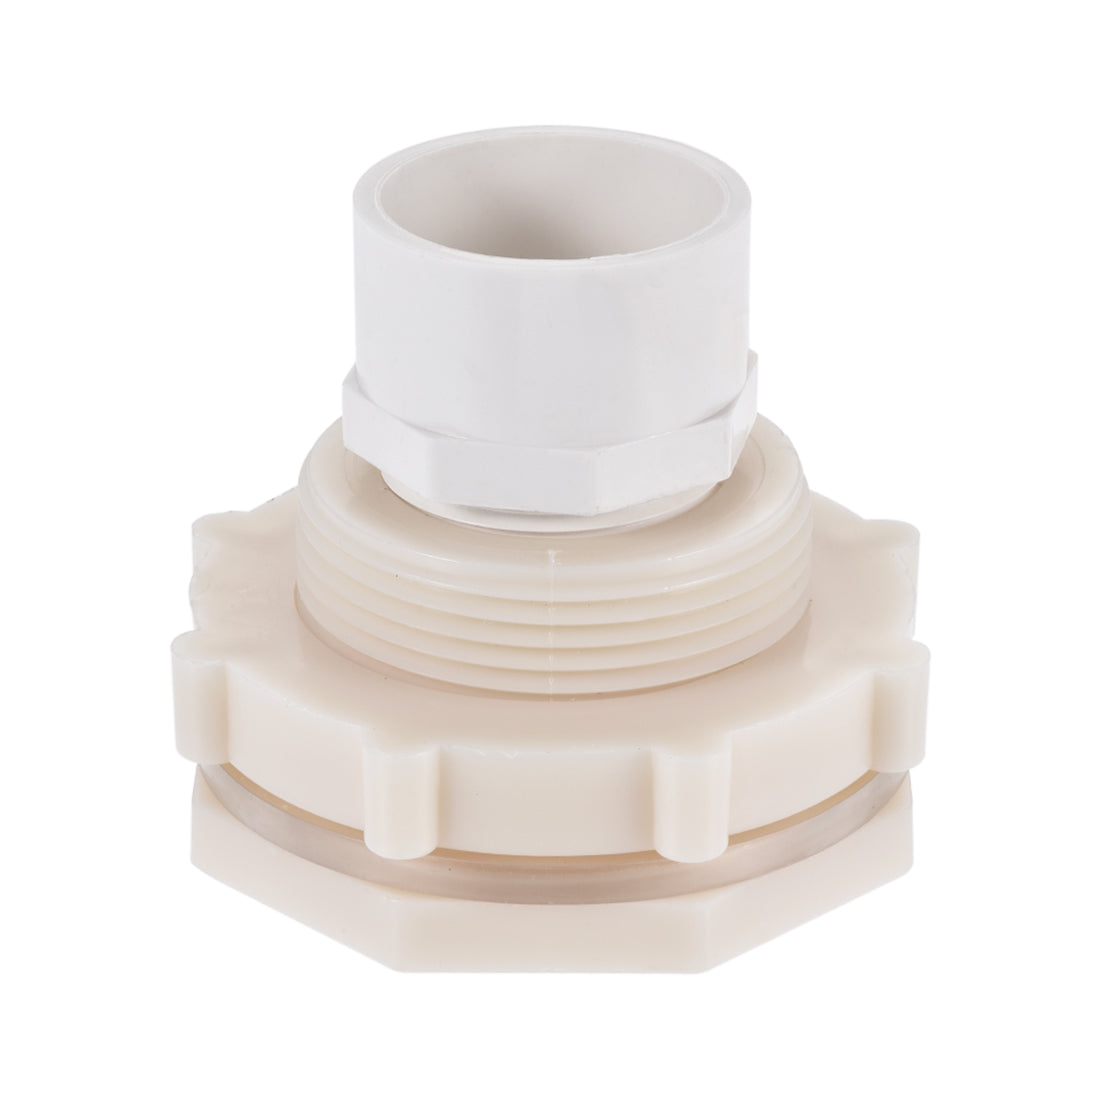 Uxcell Uxcell Bulkhead Fitting, G1-1/2 Female 2.44" Male, Tube Adaptor Fitting, with Silicone Gasket and Pipe Connector, for Water Tanks, PVC, White